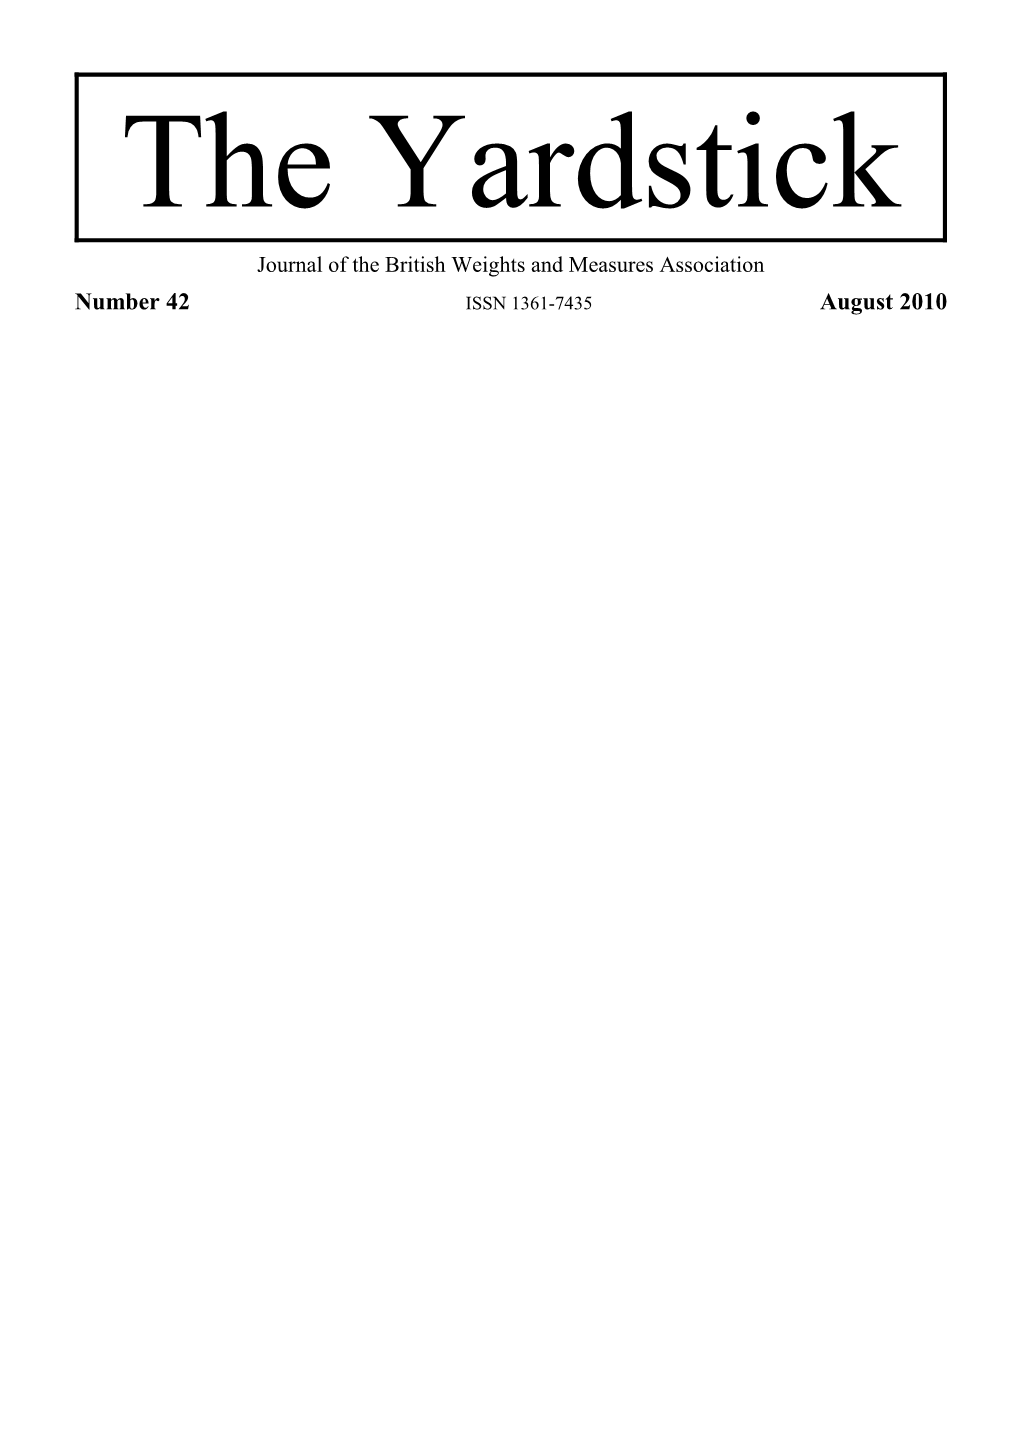 Journal of the British Weights and Measures Association